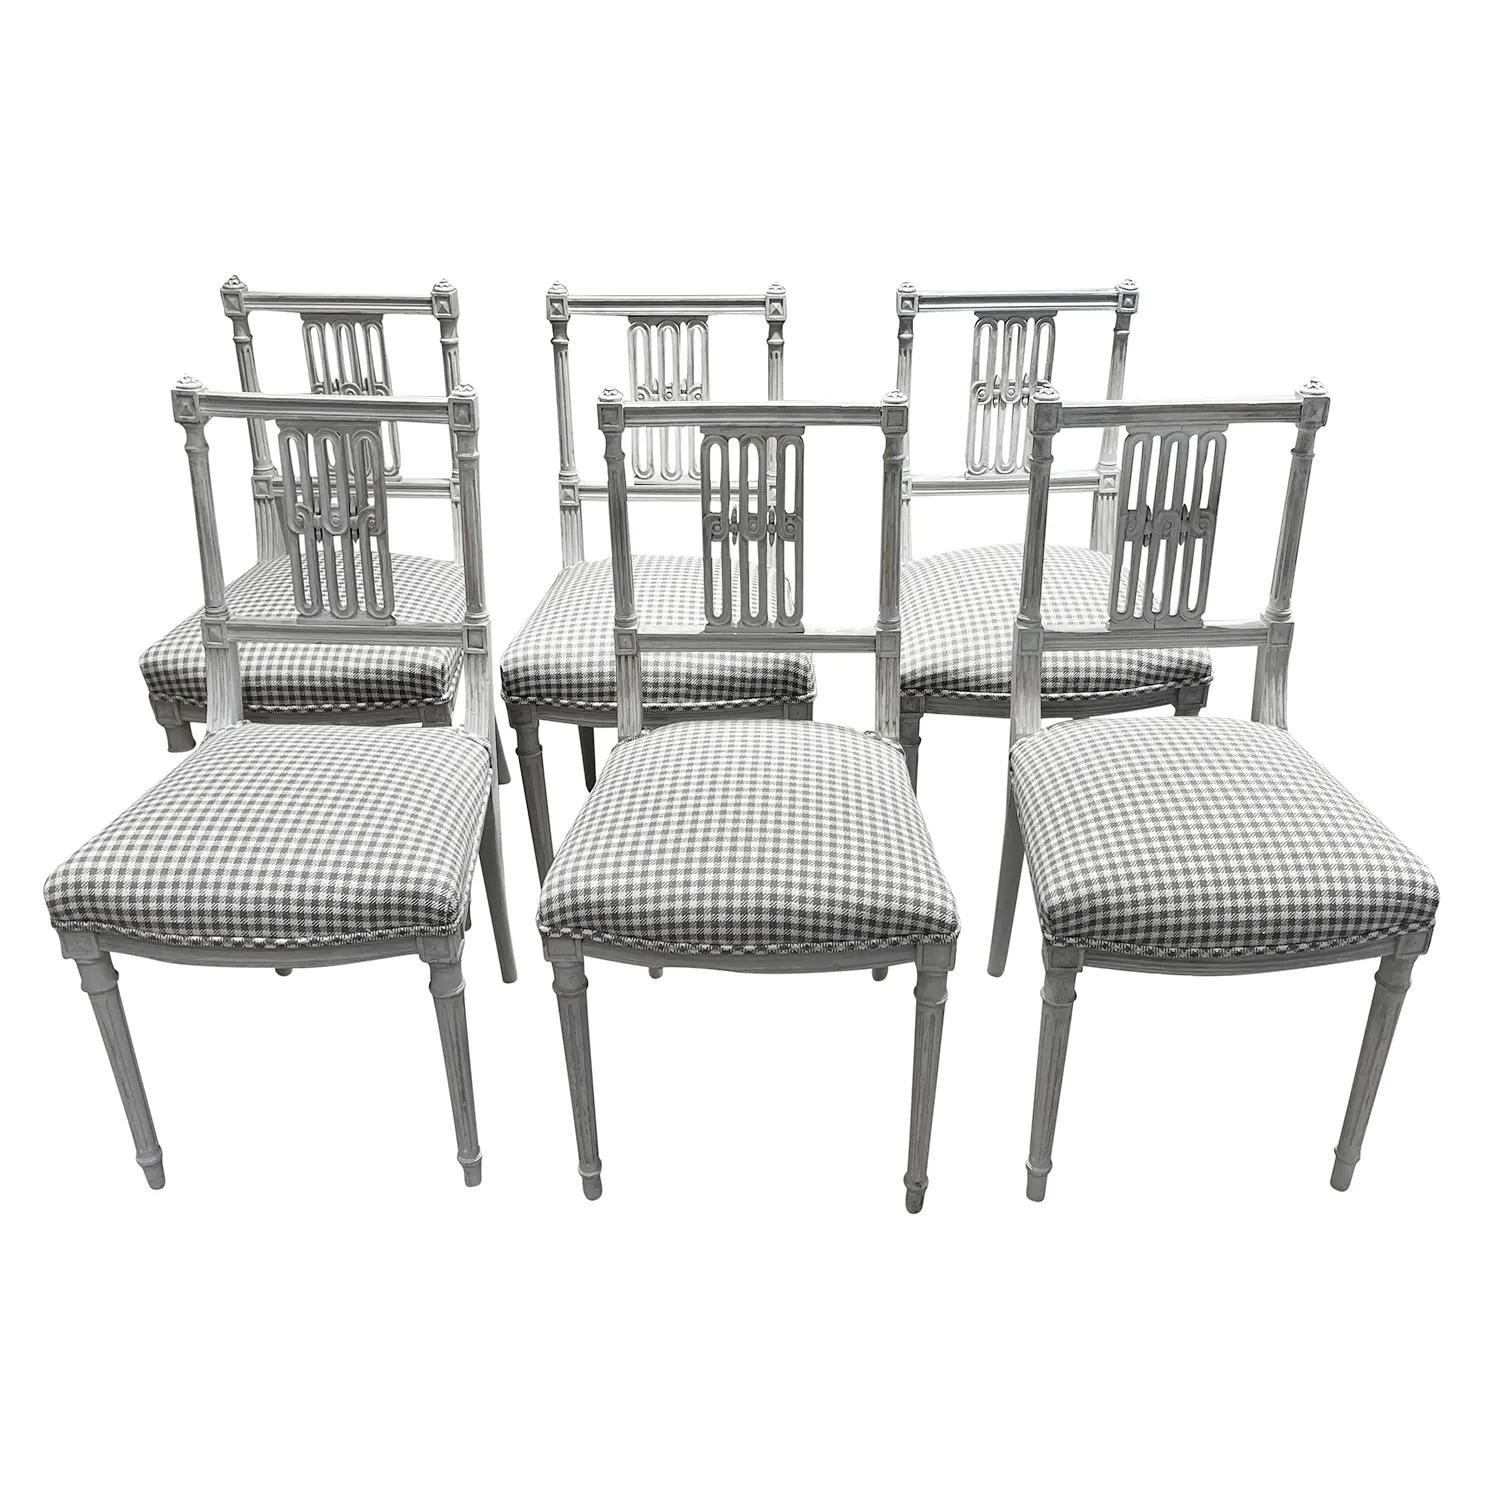 A light-grey, antique Danish set of six small side or Boudoir chairs in a chalky grey finish with square backrests and a centered floral decoration, possibly Denmark. The Scandinavian dining end chairs are made of hand carved Pinewood in good